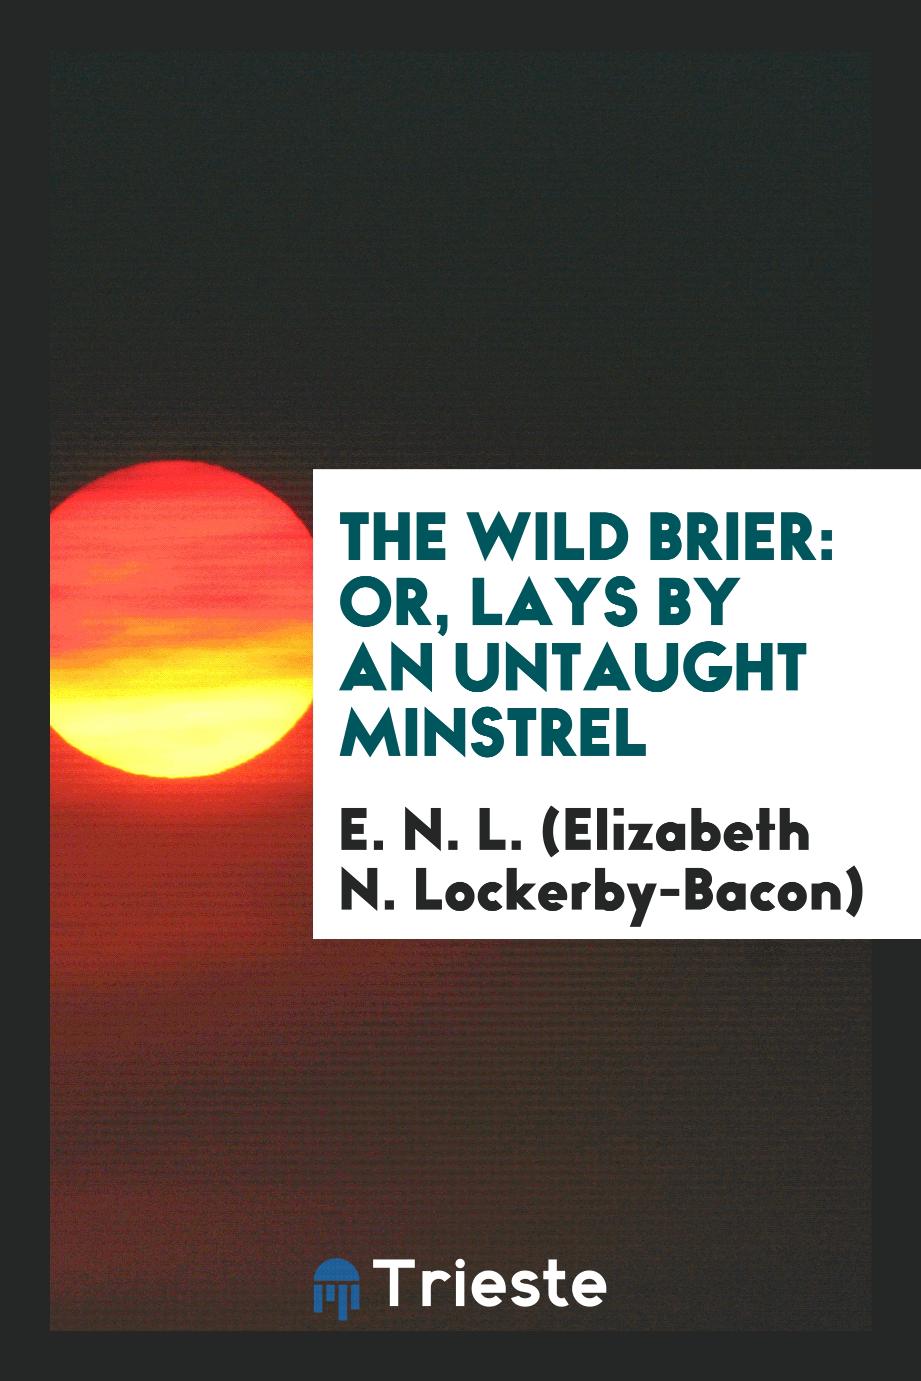 The Wild Brier: Or, Lays by an Untaught Minstrel